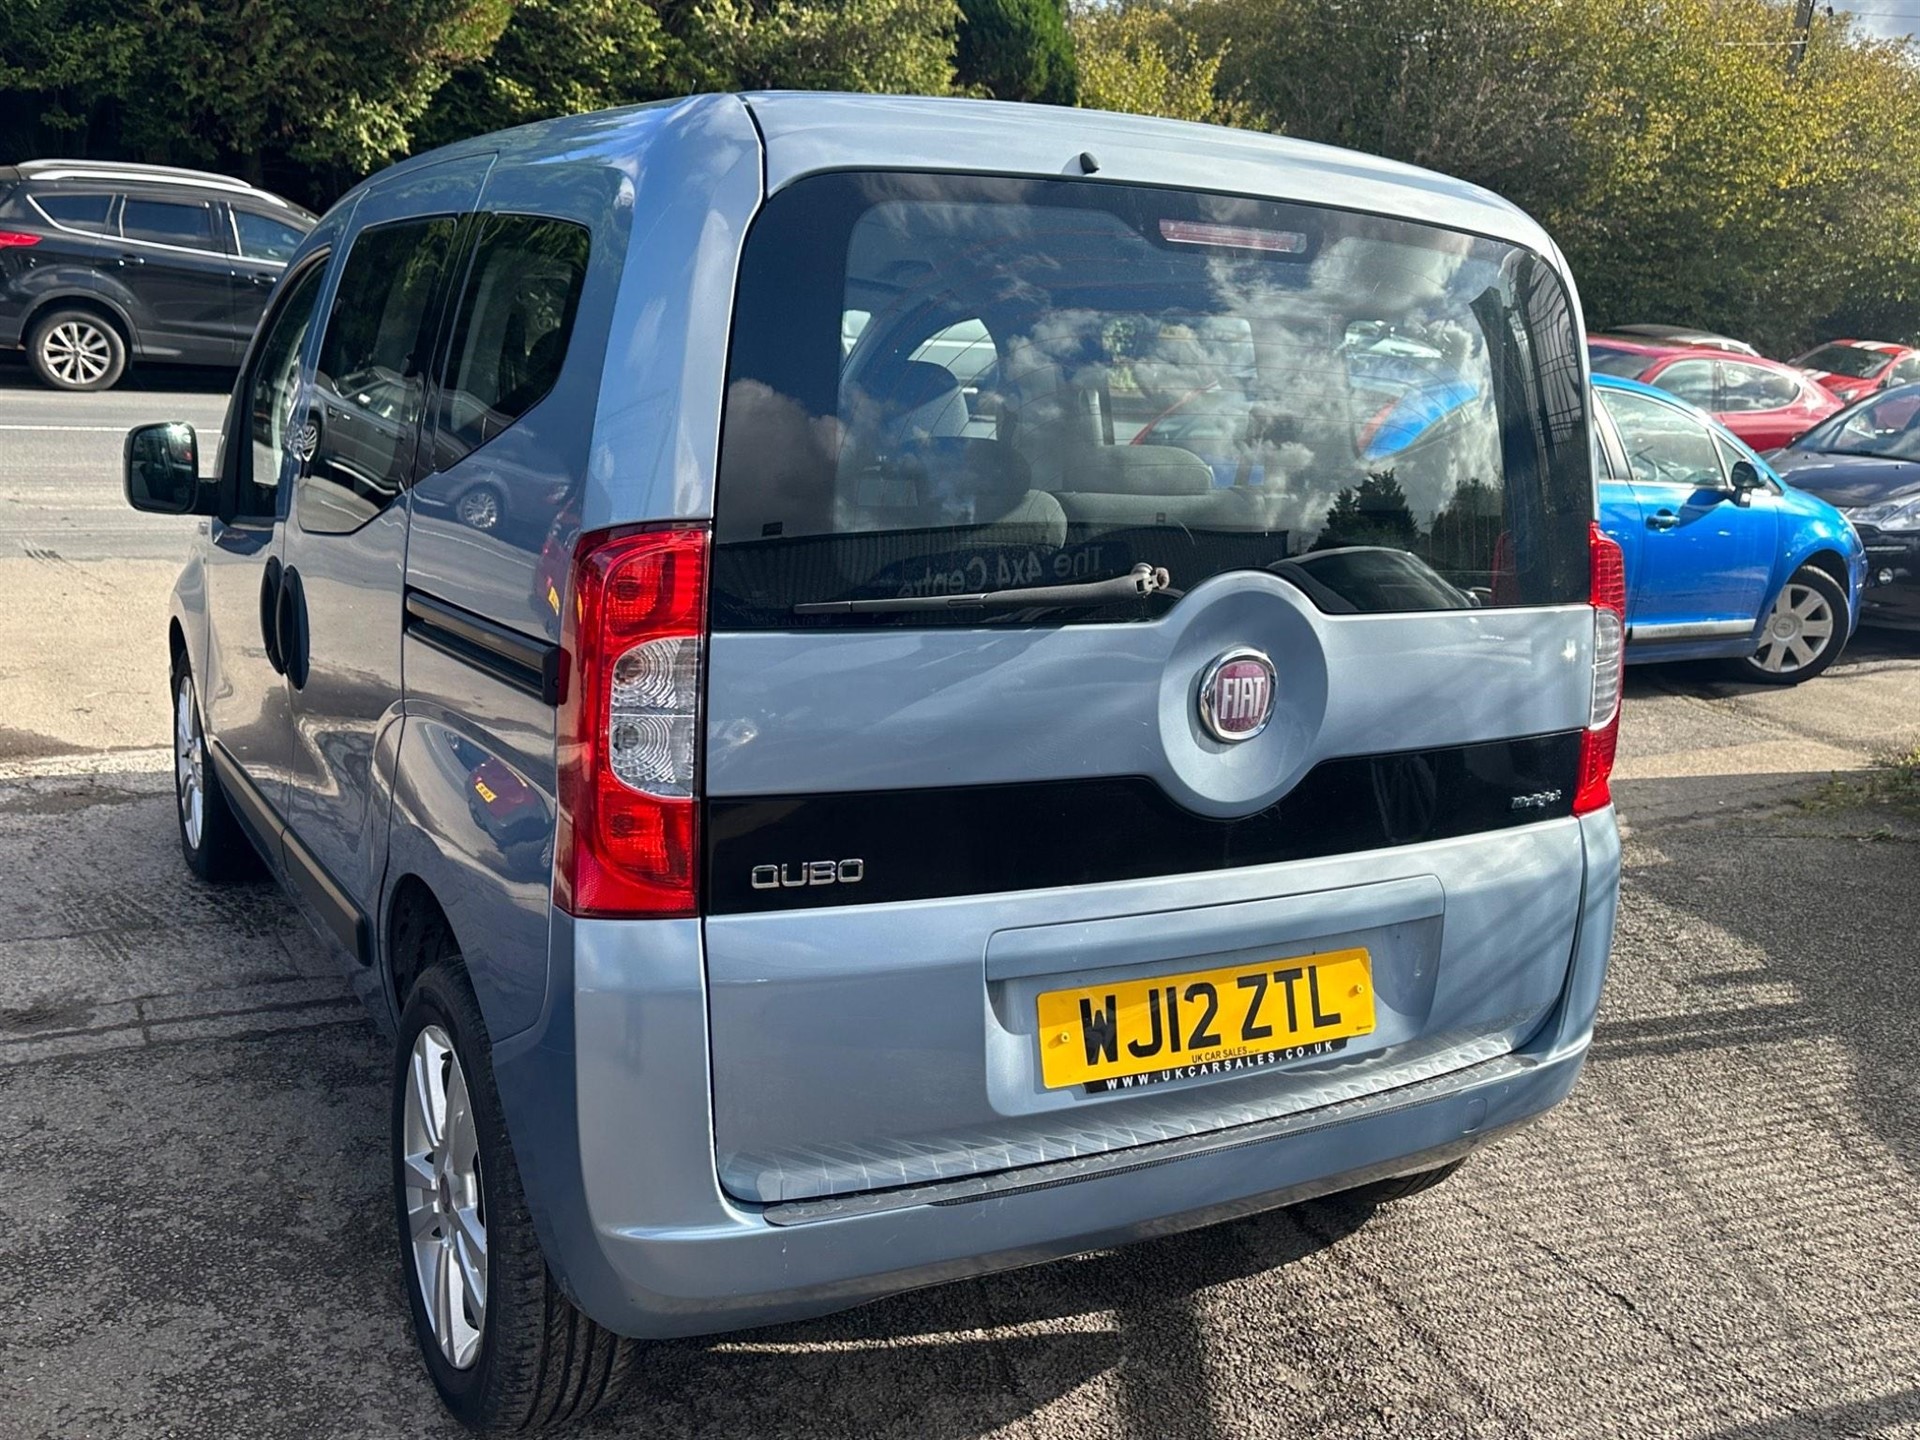 Used Fiat Qubo for sale in Hengoed, Mid Glamorgan